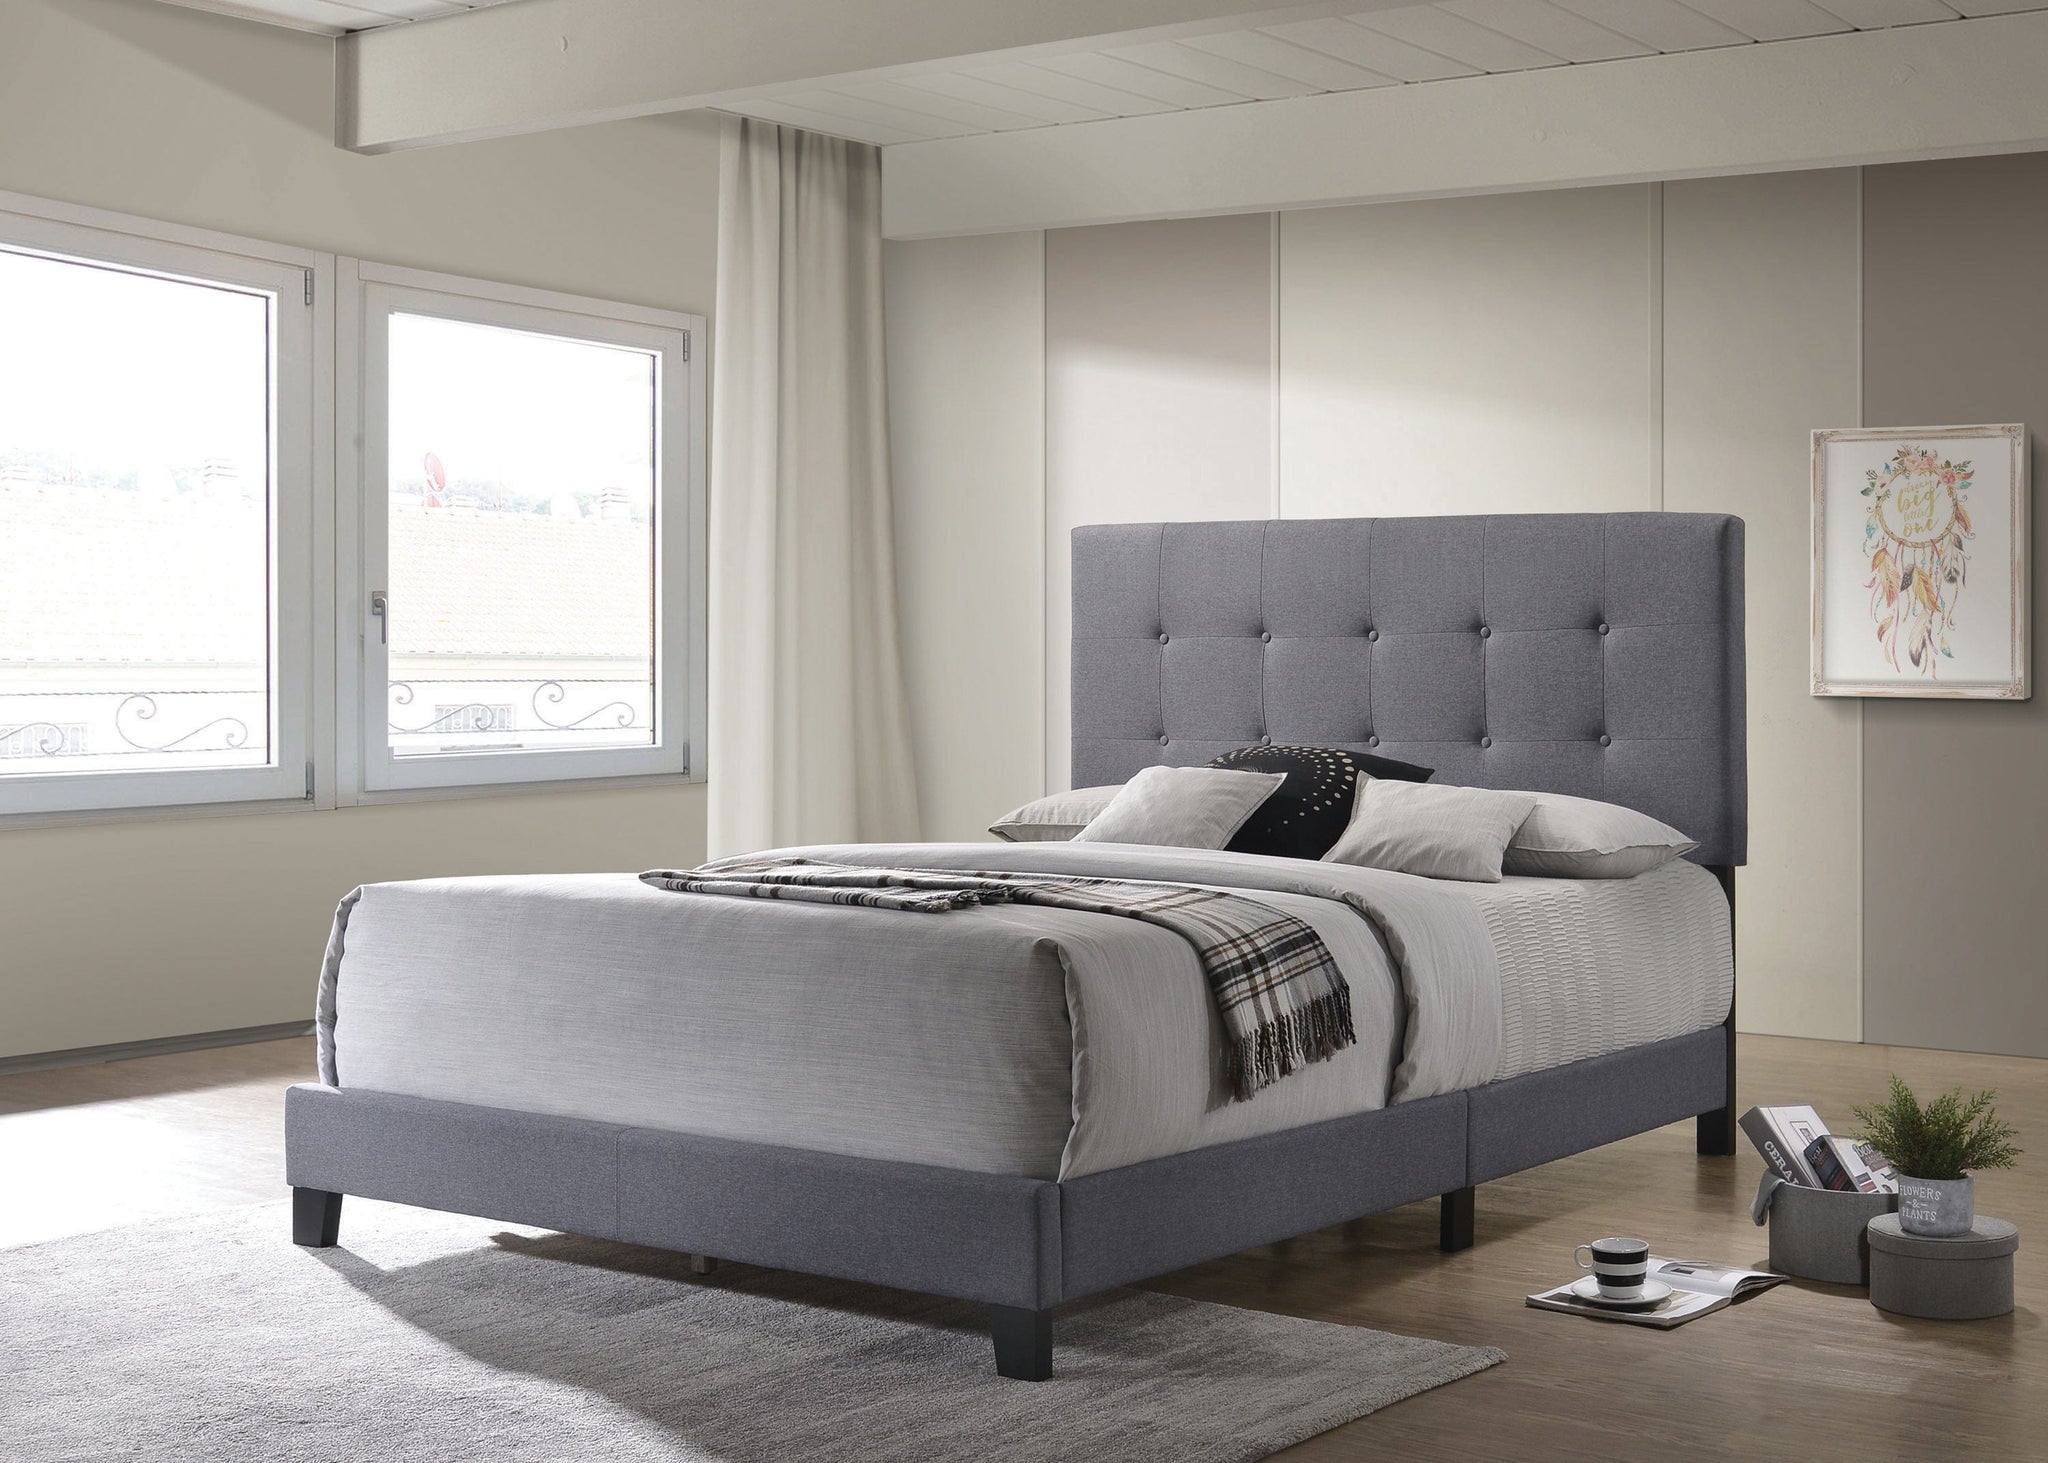 Mapes Tufted Upholstered Queen Bed Grey - 305747Q